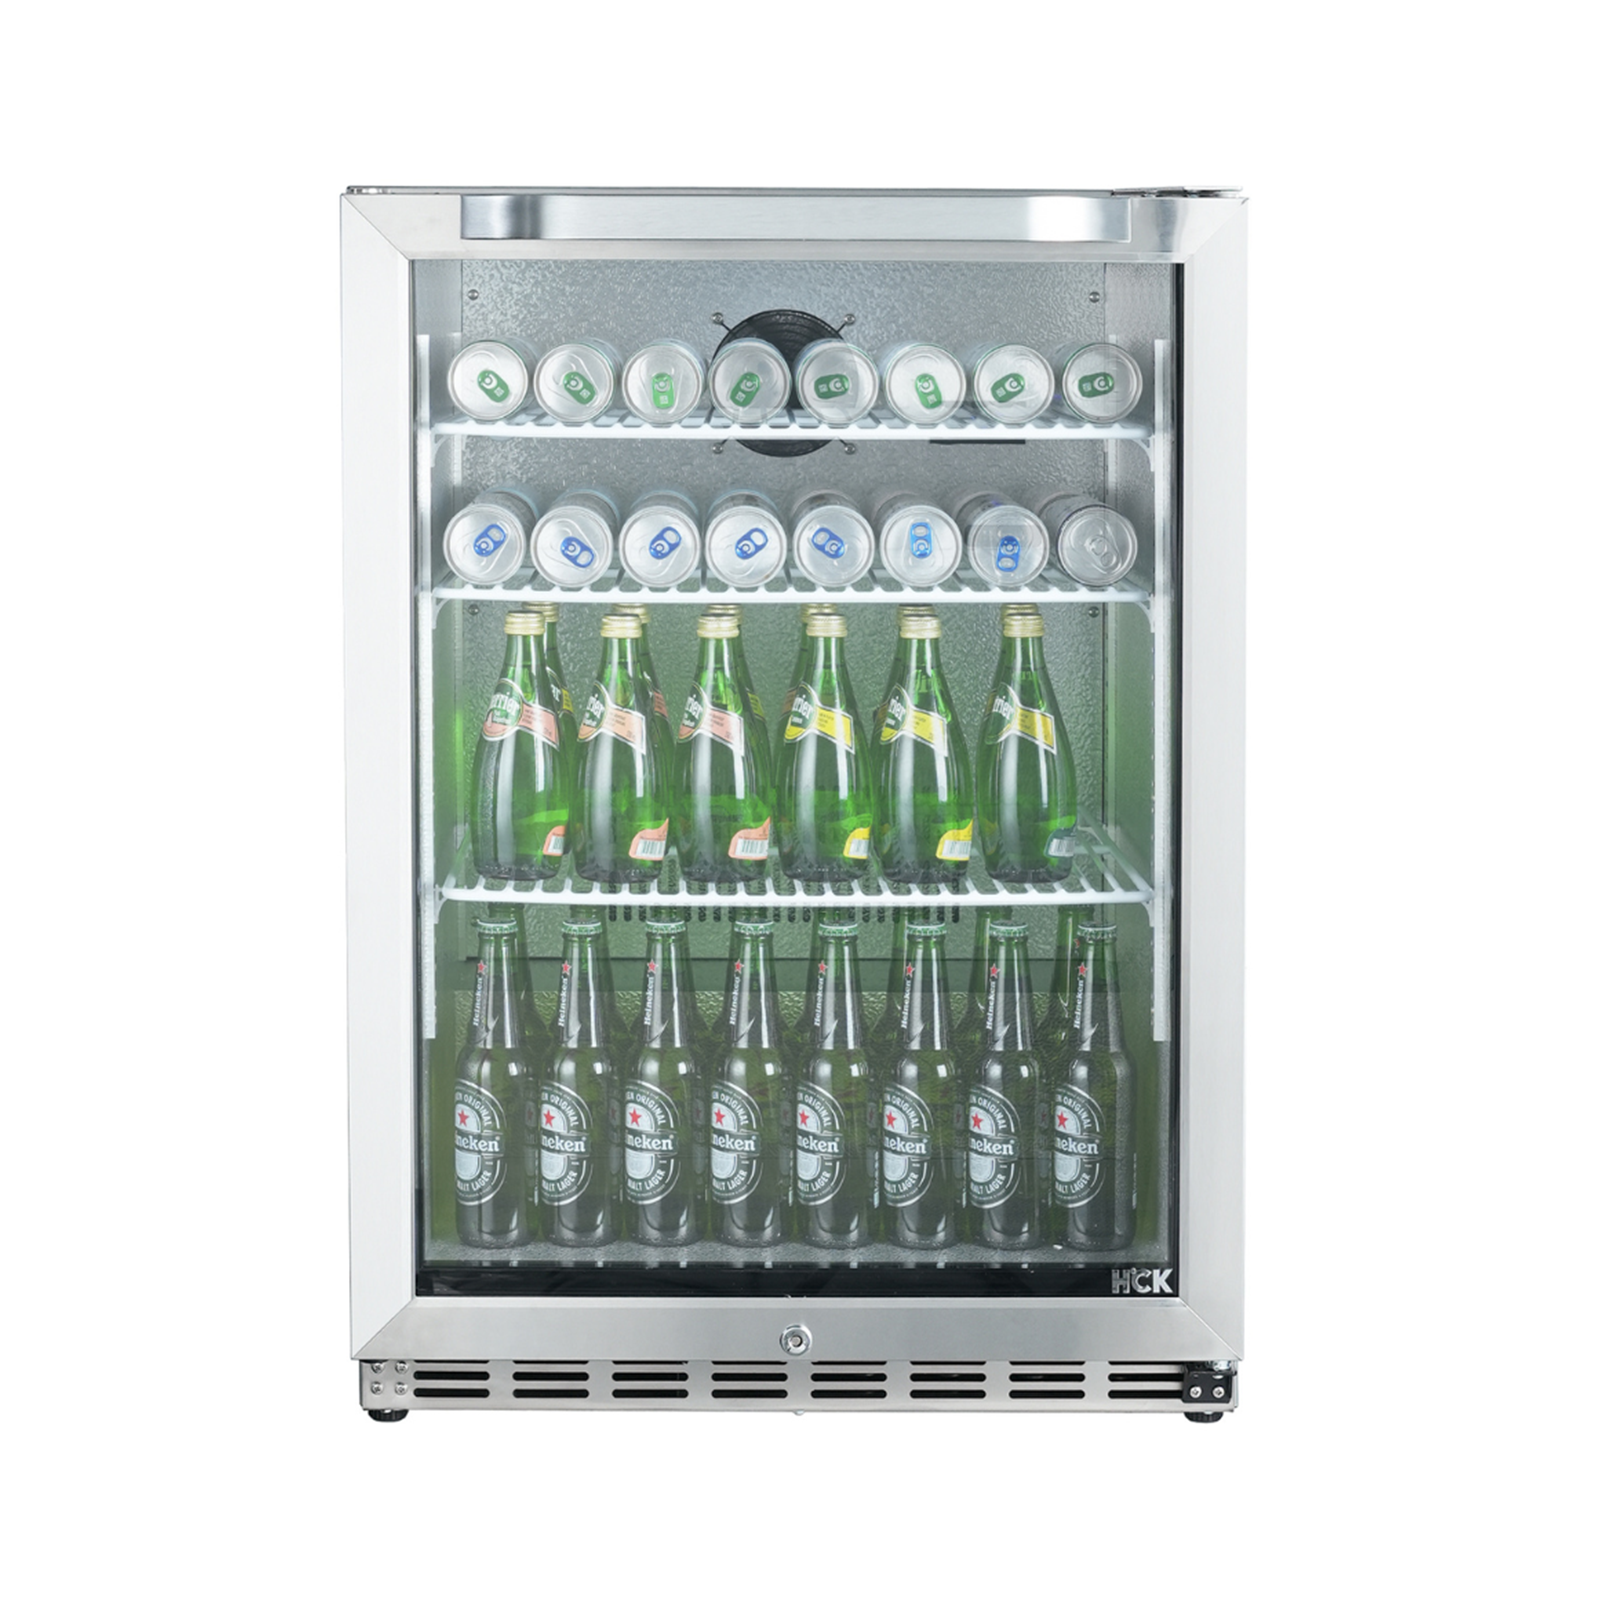 Front view of a 5.12 Cu Ft Beverage Outdoor Refrigerator with a glass door, providing visibility to the interior space and the beverages stored inside the fridge.